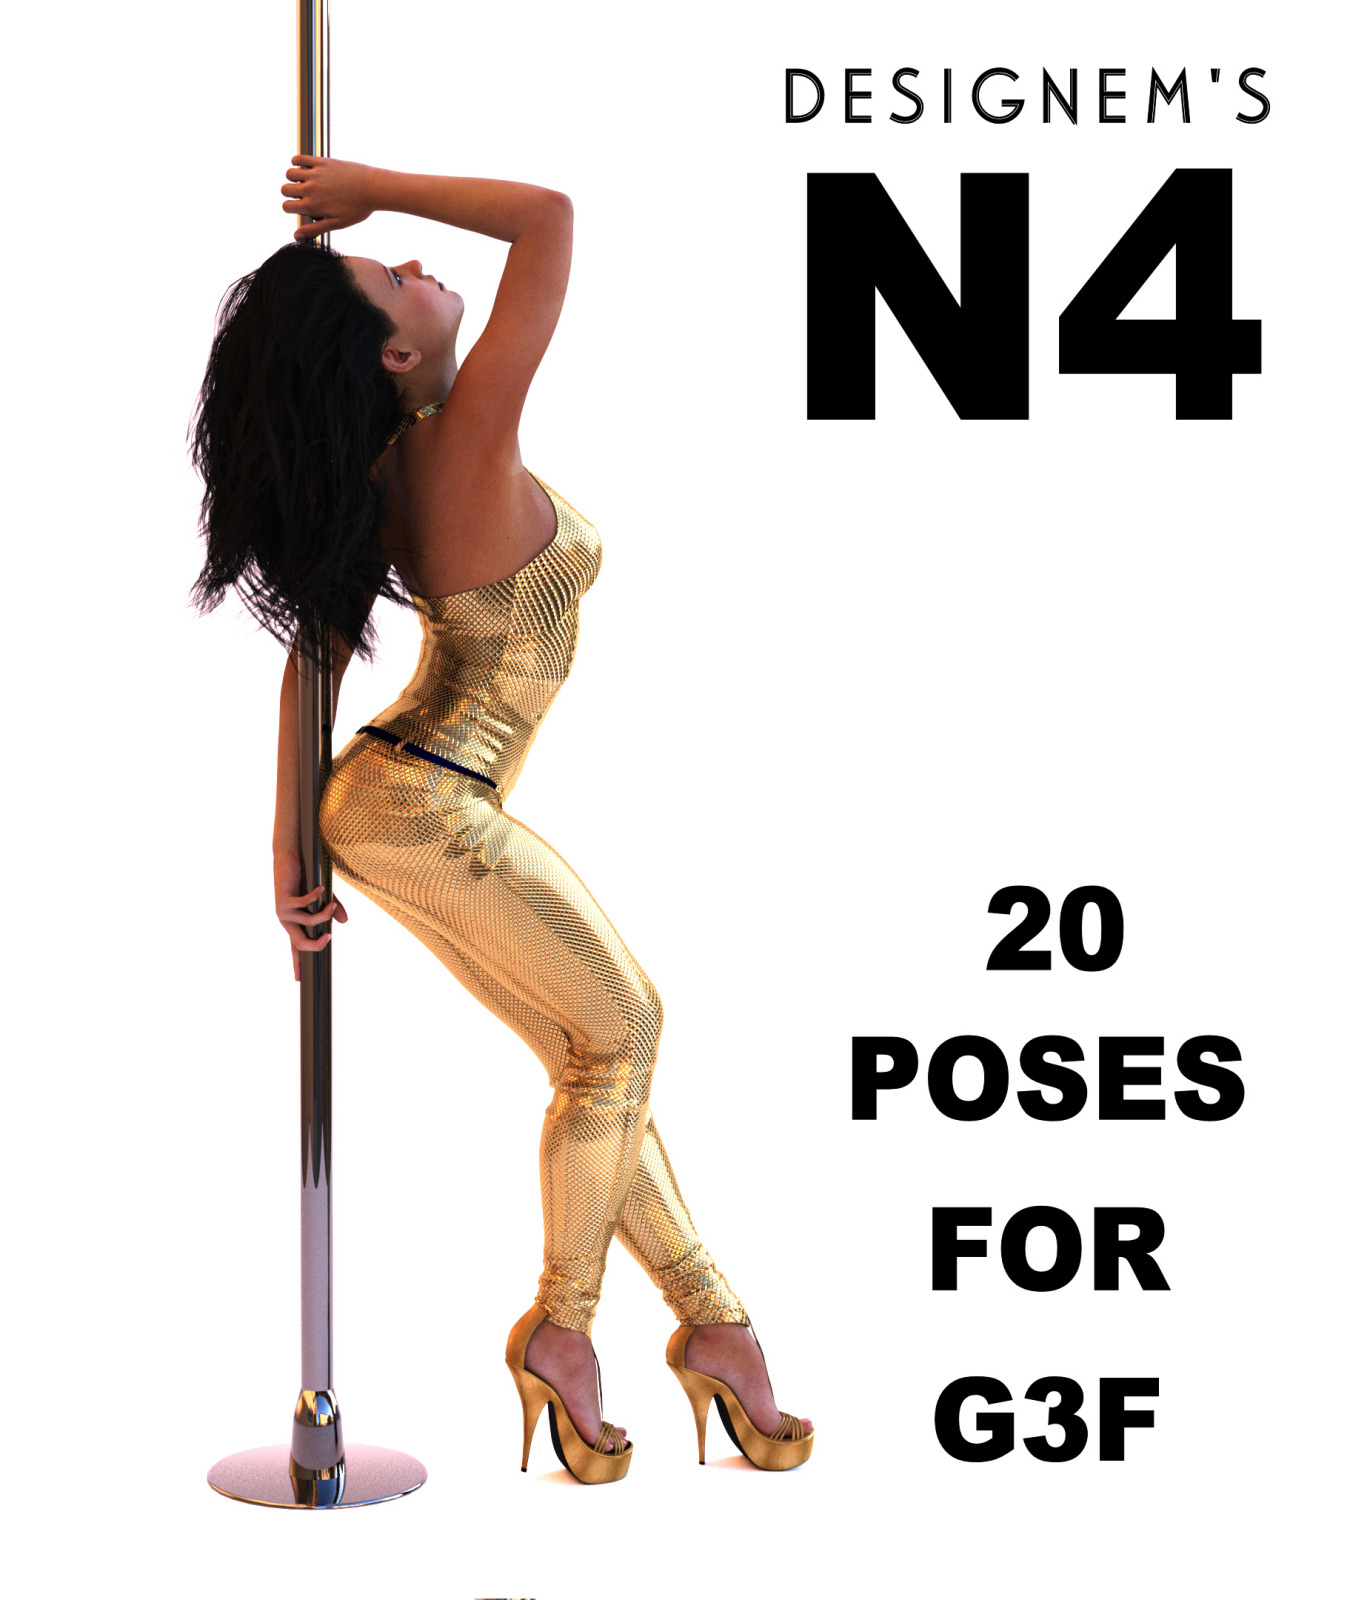 Natural 4 poses for G3F